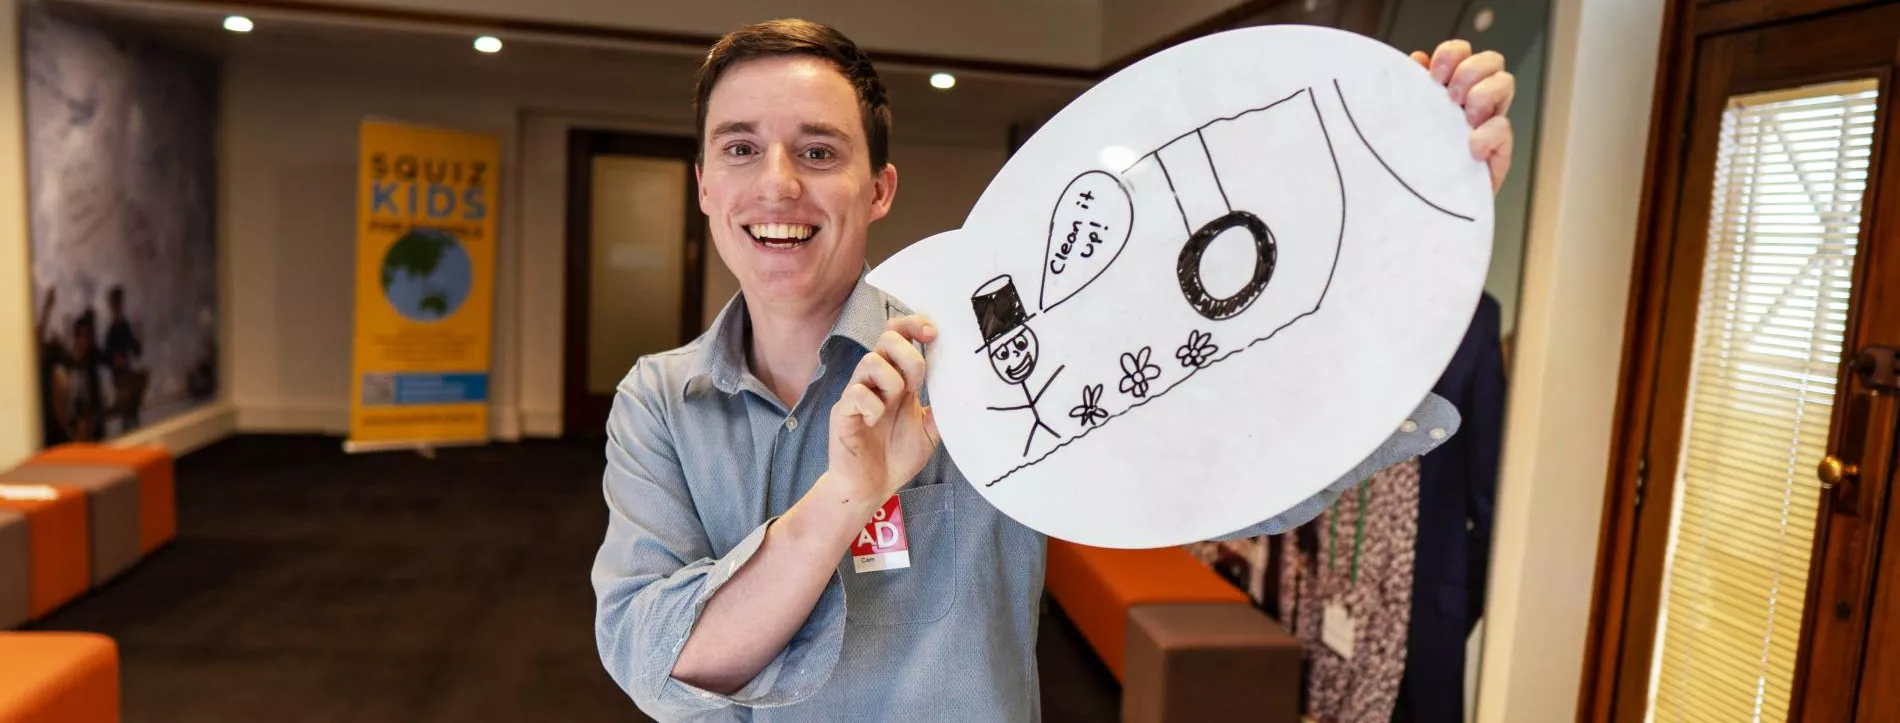 A person holds up a whiteboard speech bubble with a drawing on it.